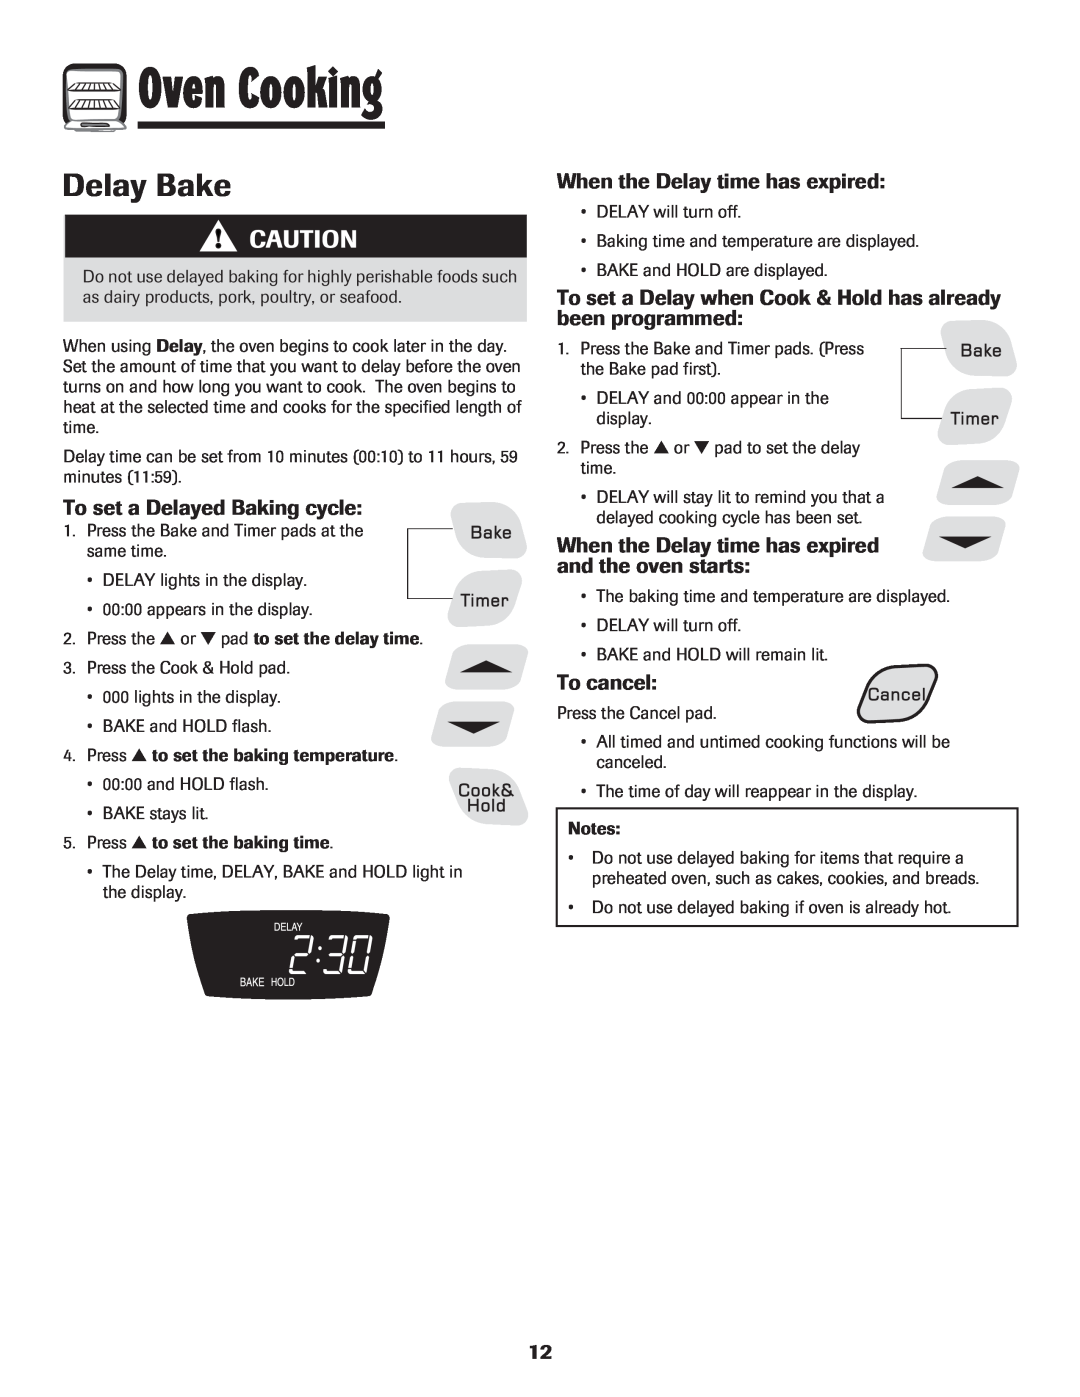 Amana 8113P454-60 Delay Bake, To set a Delayed Baking cycle, When the Delay time has expired, To cancel, Oven Cooking 